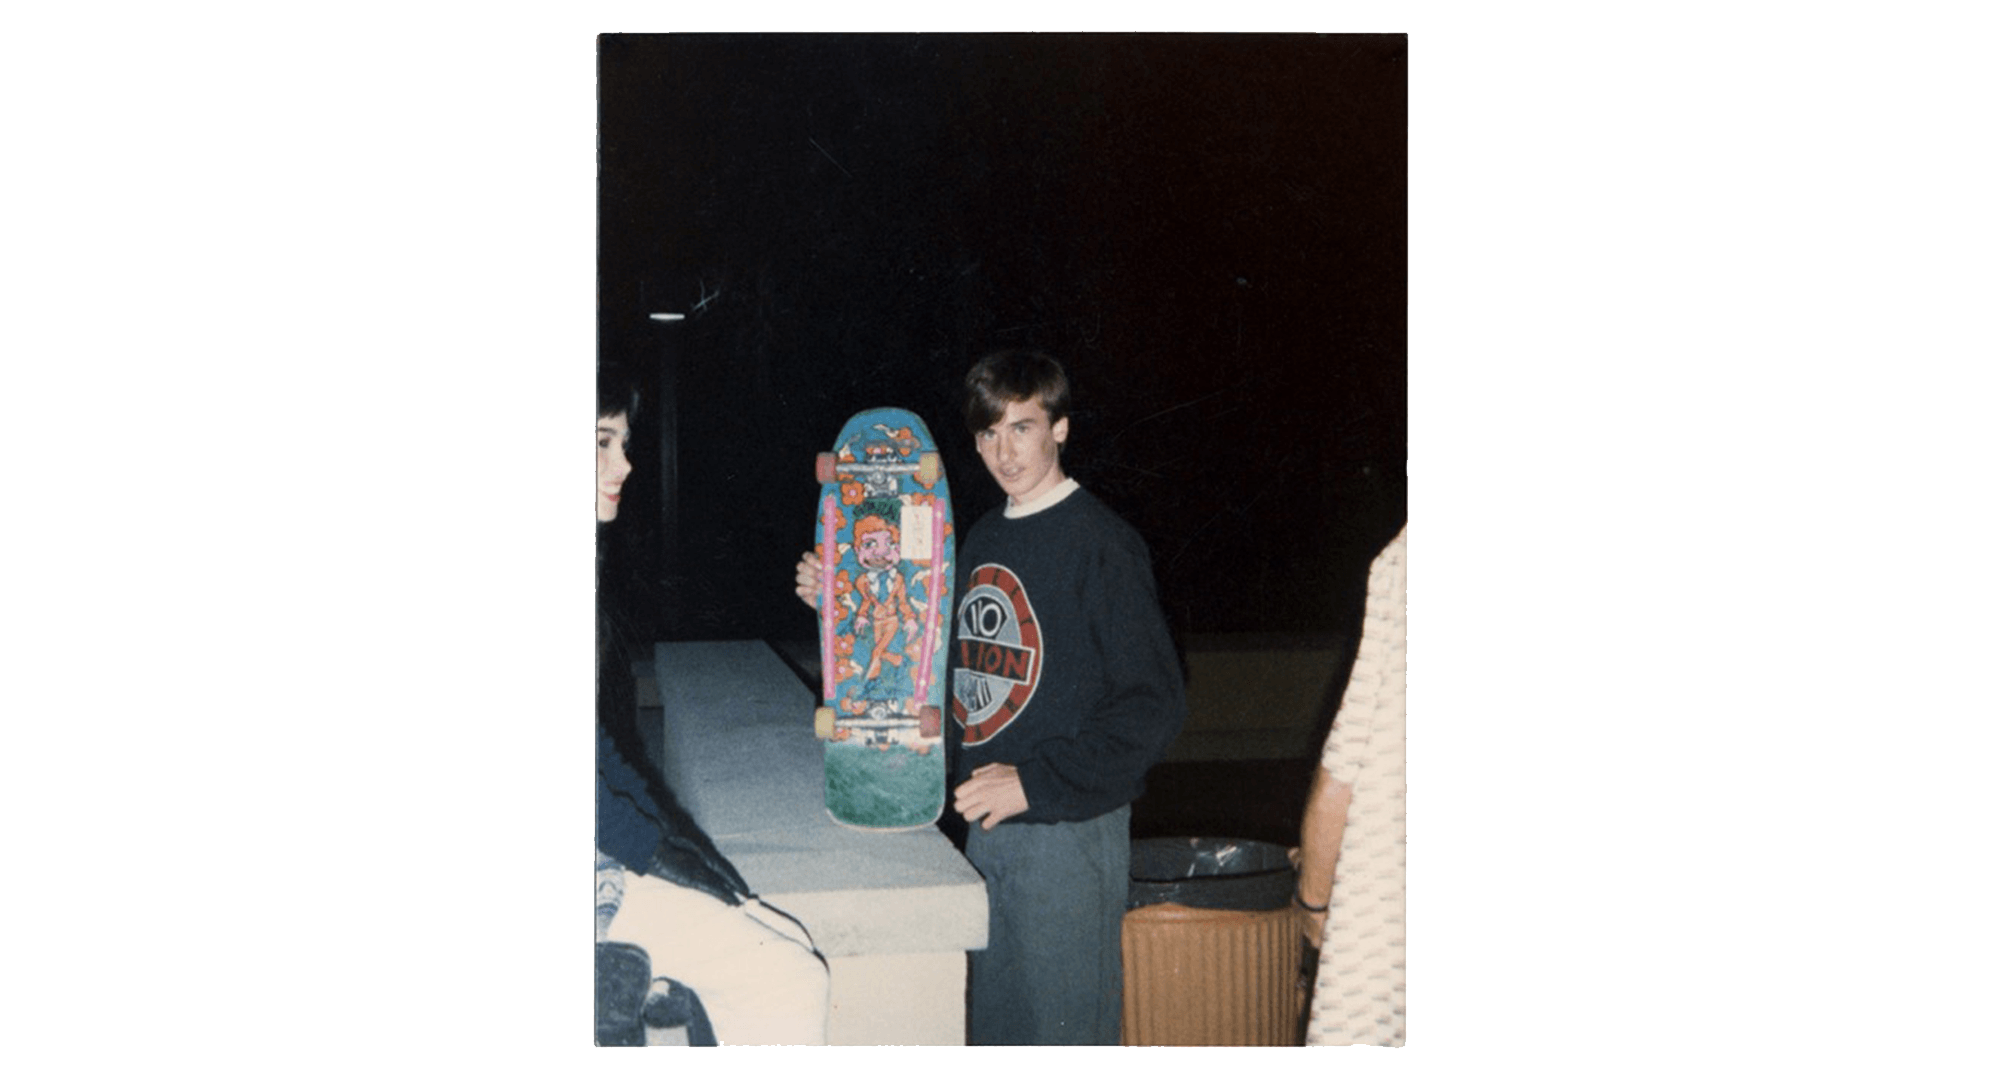 Ed Templeton and skateboard graphic art